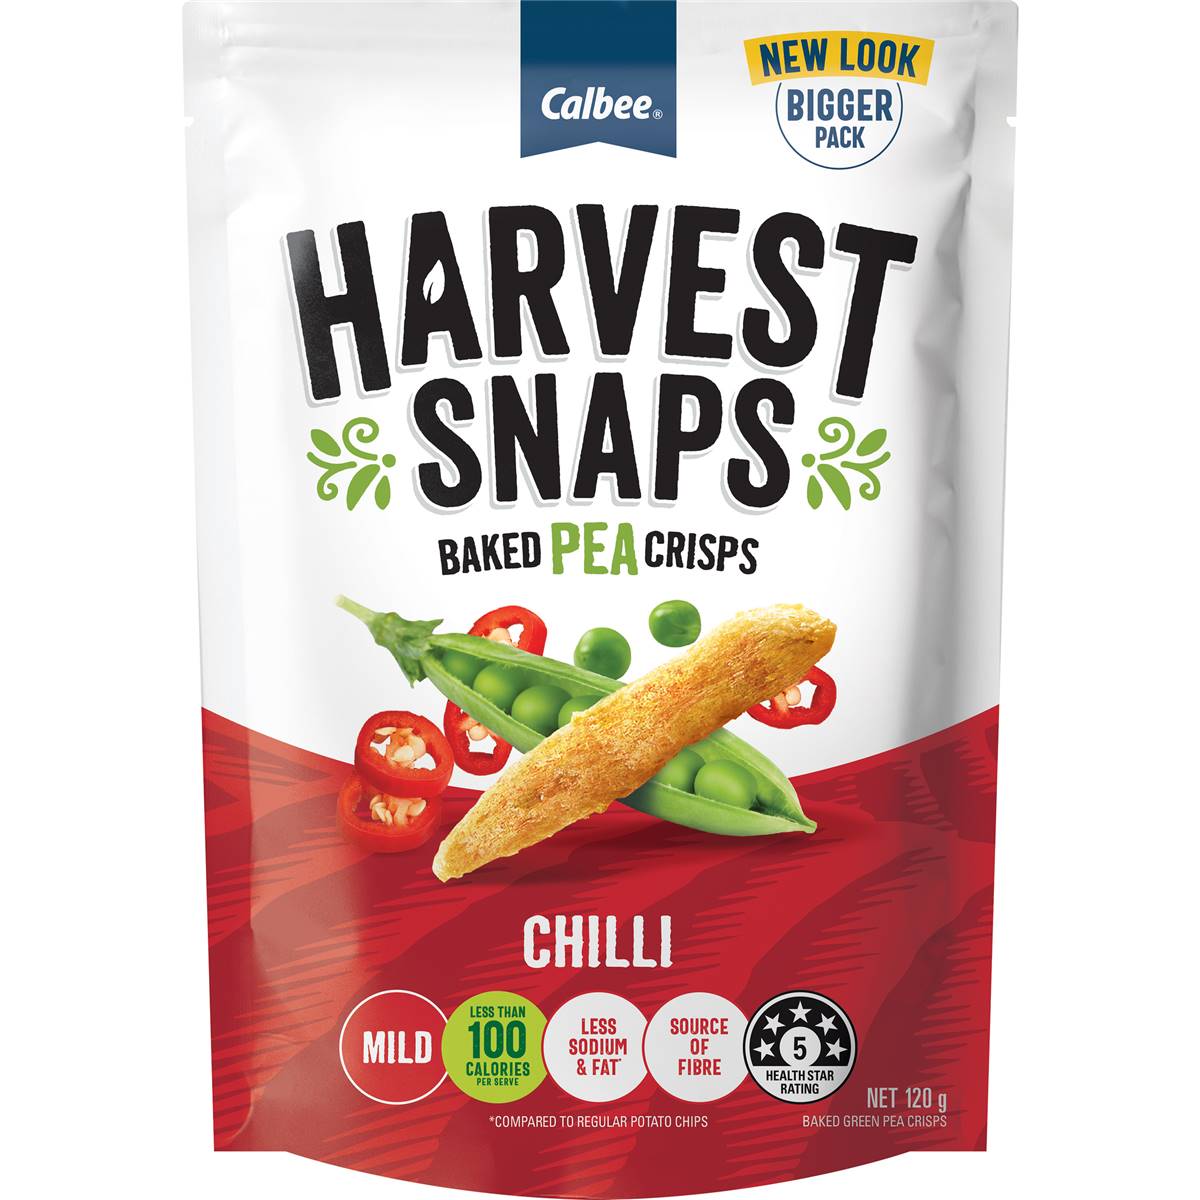 Calories in Calbee Harvest Snaps Baked Pea Crisps Chilli